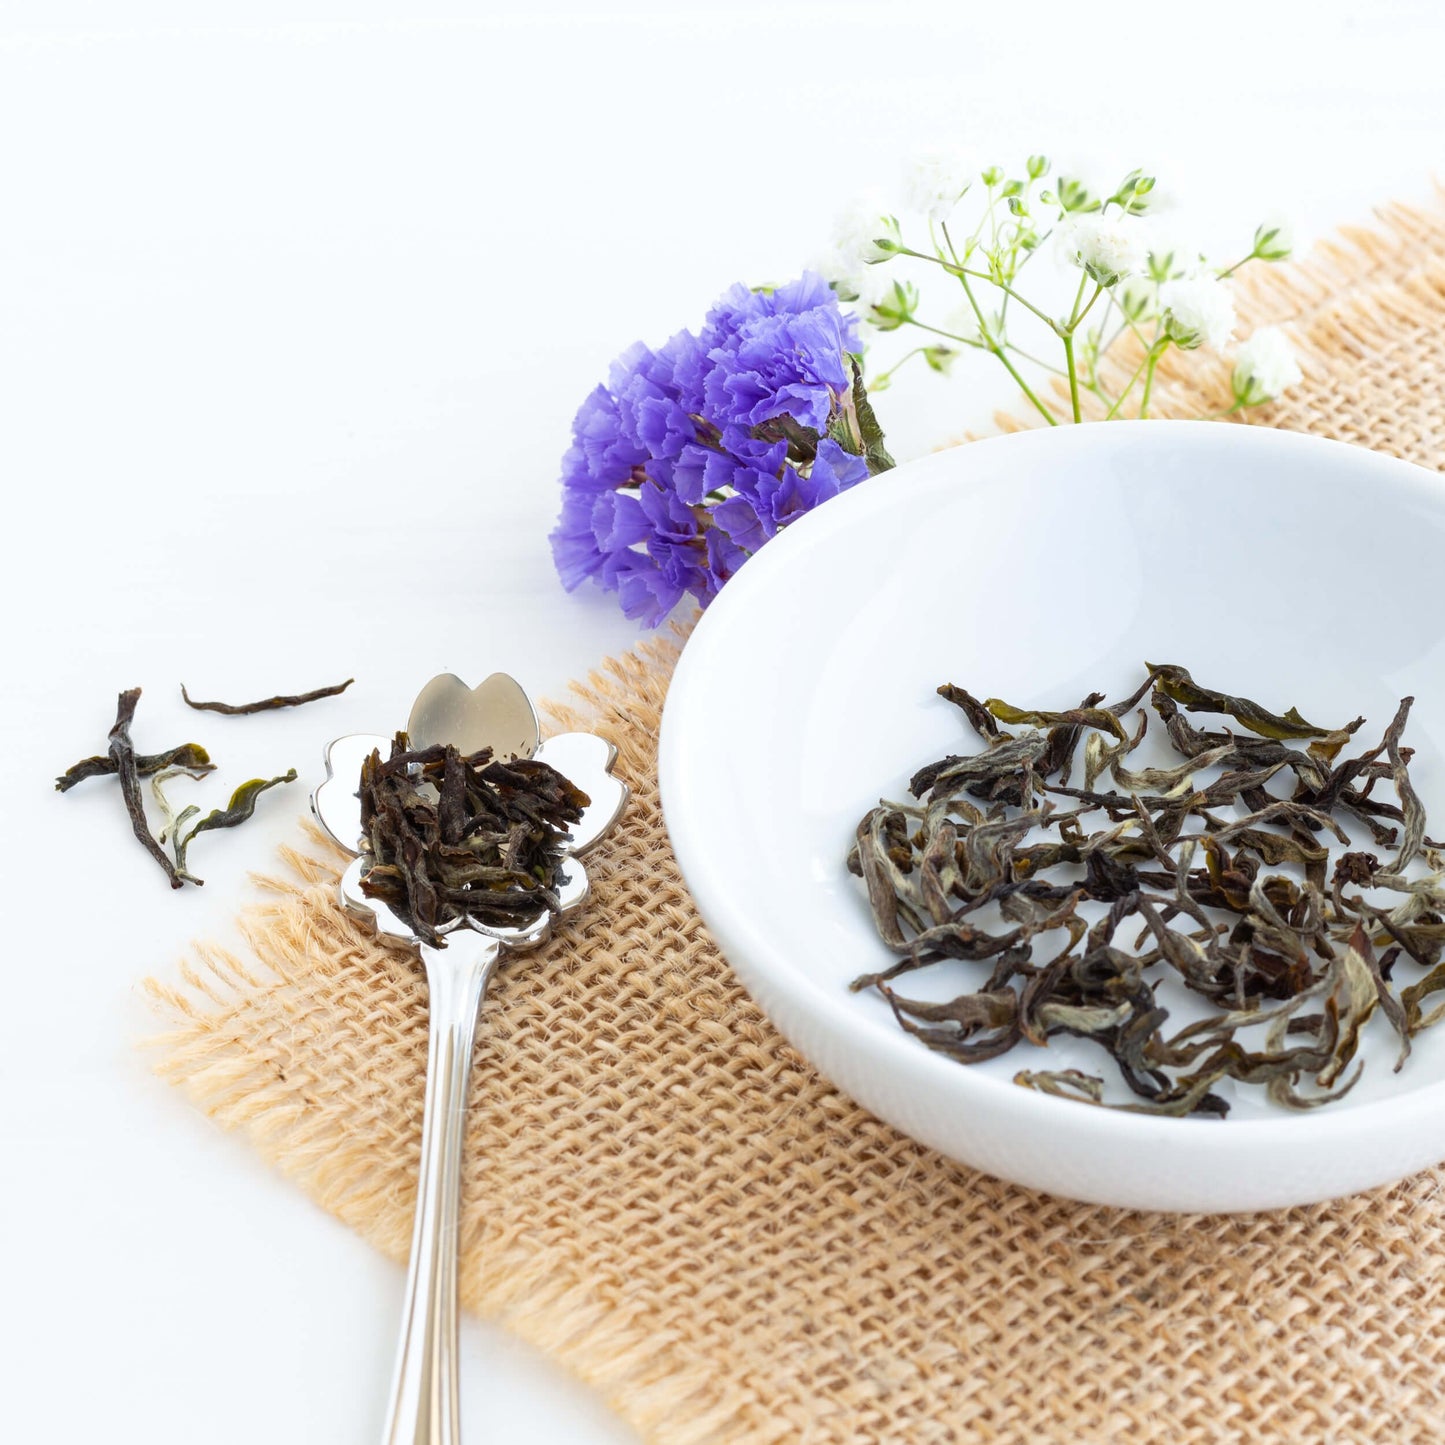 Himalayan Spring Organic Green Tea shown as loose tea leaves in a white dish with a flower-shaped spoon nearby, displayed on burlap with some purple flowers.